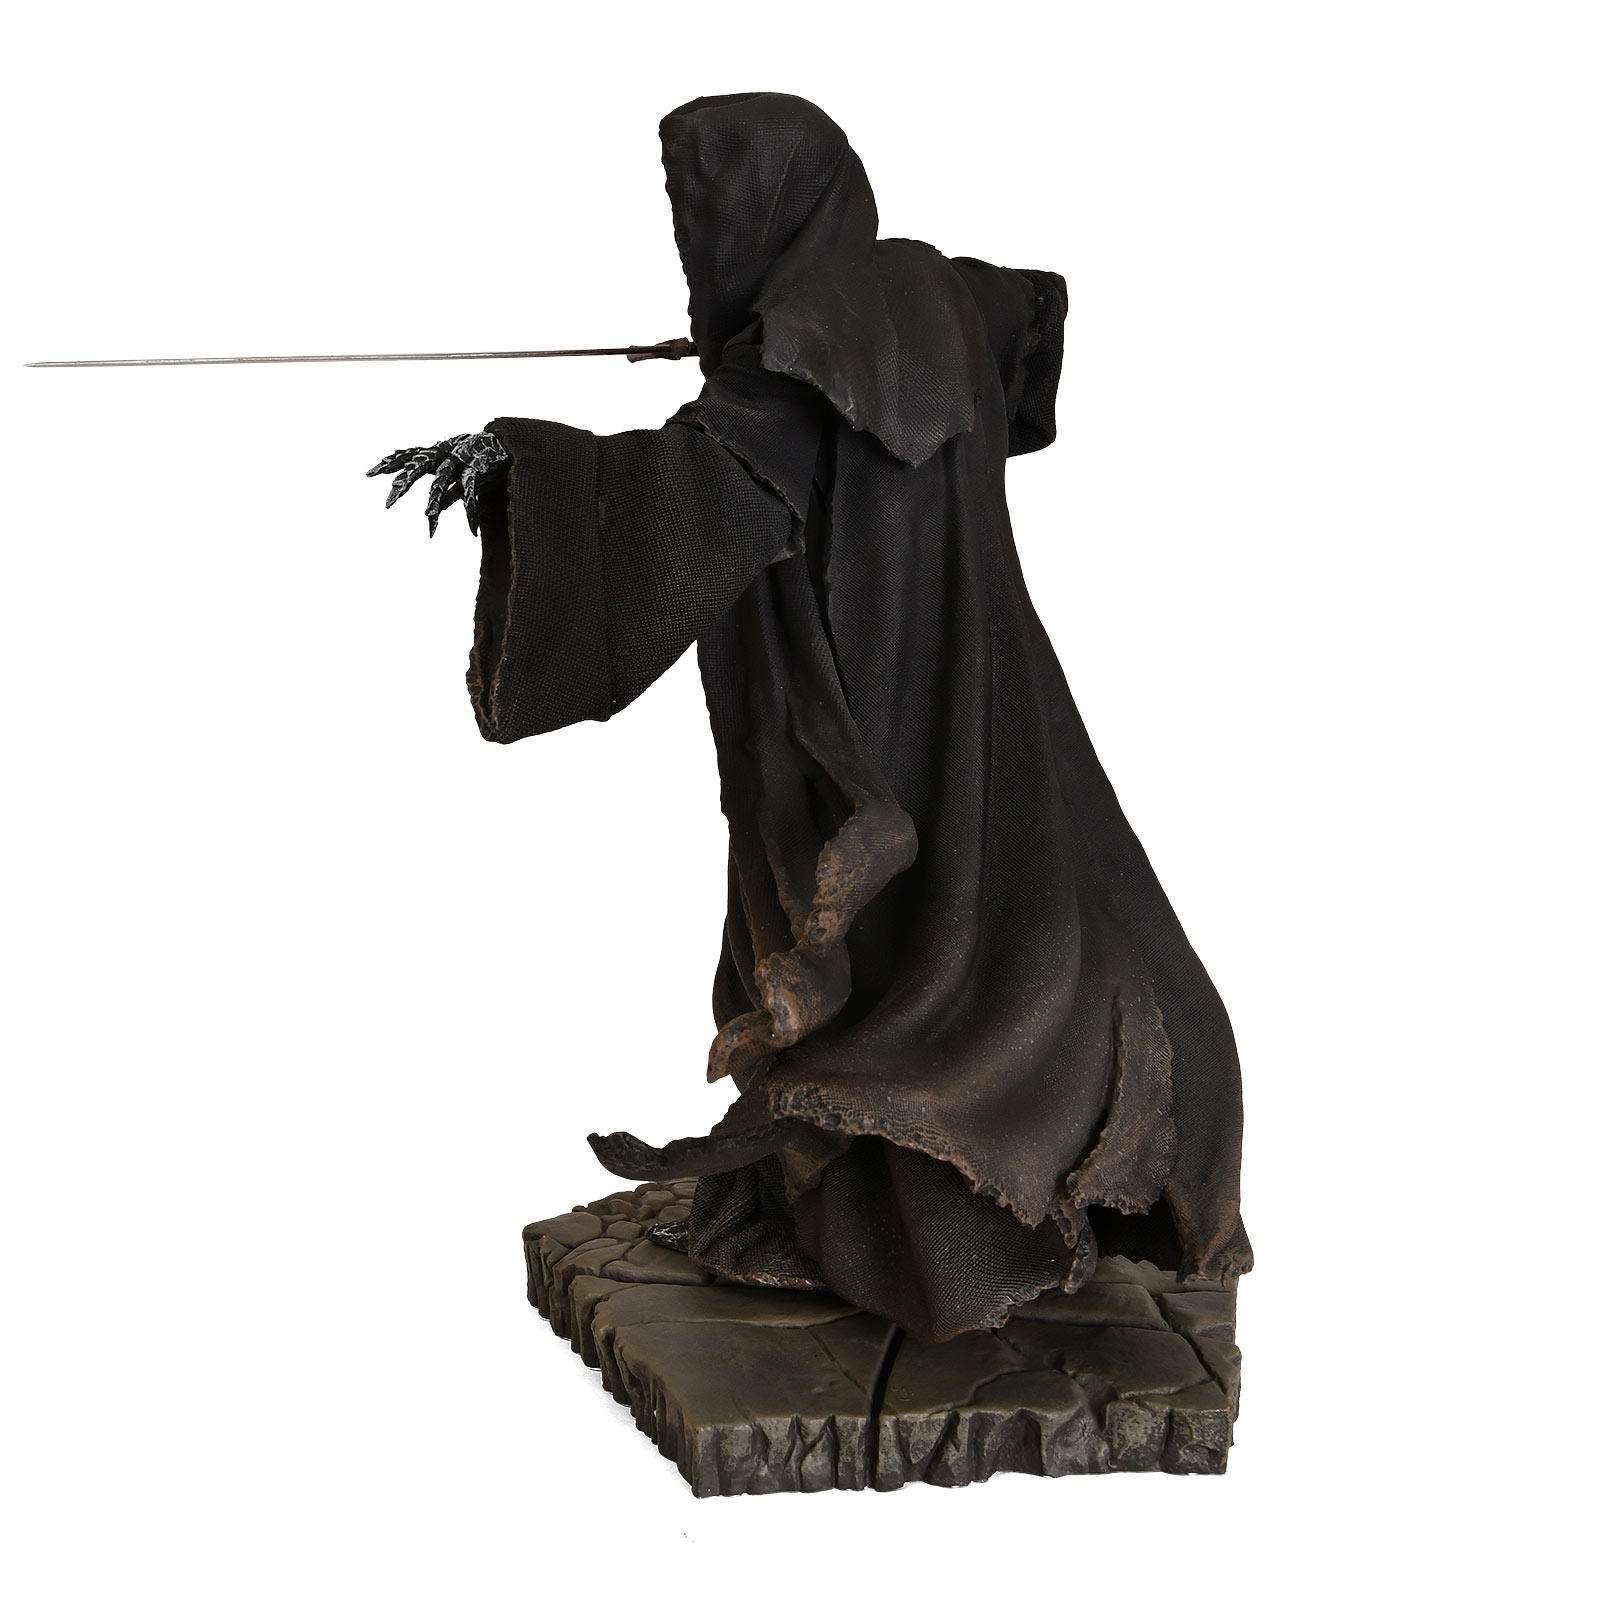 Lord of the Rings - Attacking Nazgul BDS Art Scale Deluxe Statue 22 cm